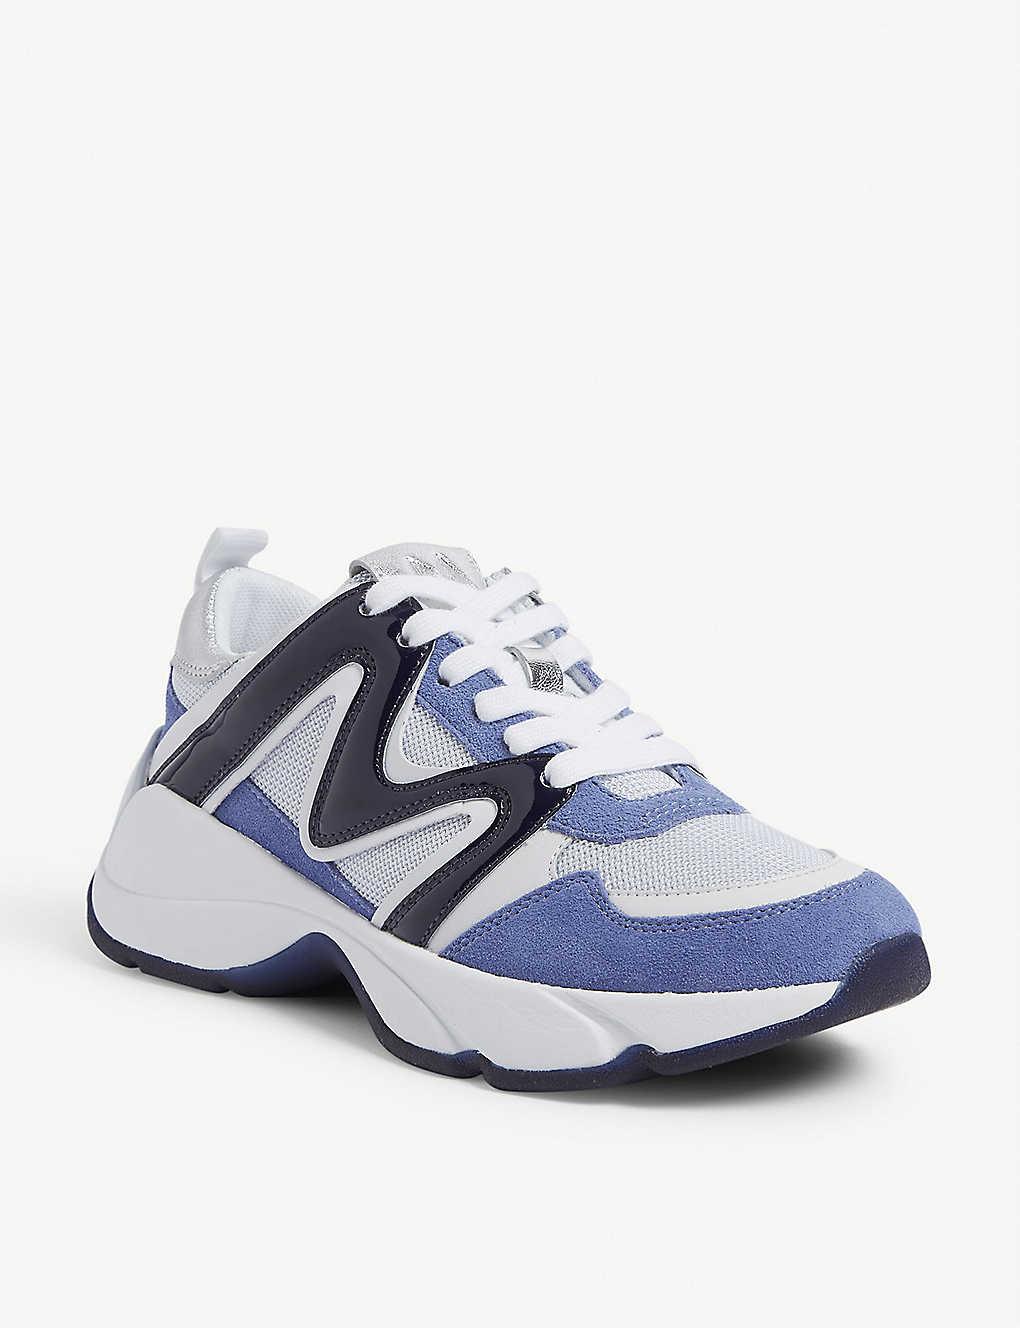 Maje W22 Mesh And Leather Trainers in Blue | Lyst